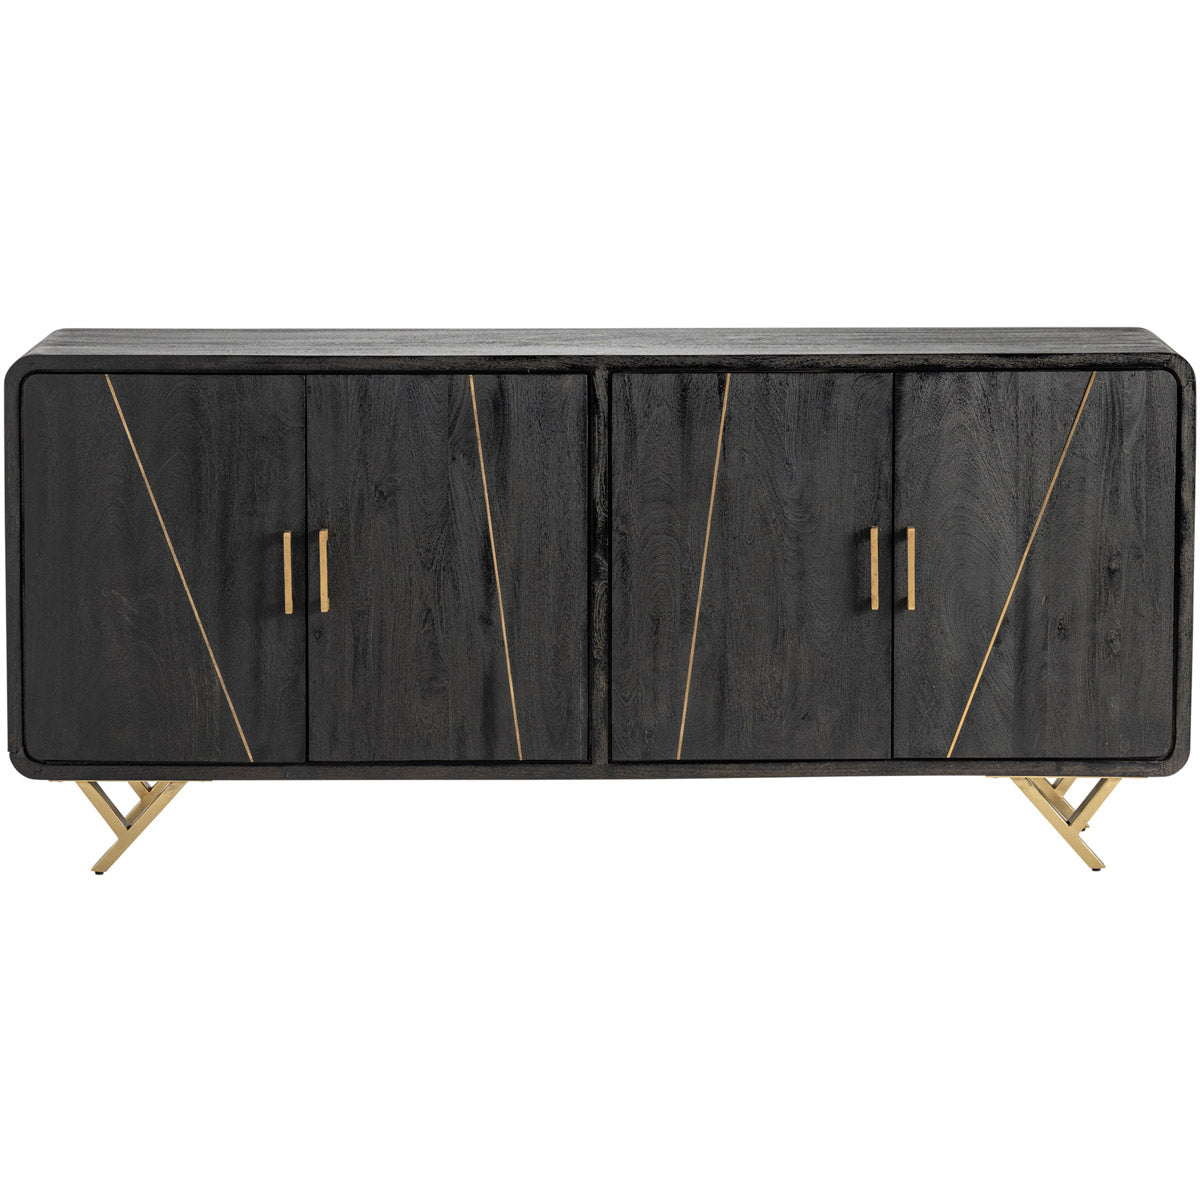 Crestview Collection Mosley 72" x 16" x 32" 4-Door Modern Black and Gold Wood And Metal Sideboard